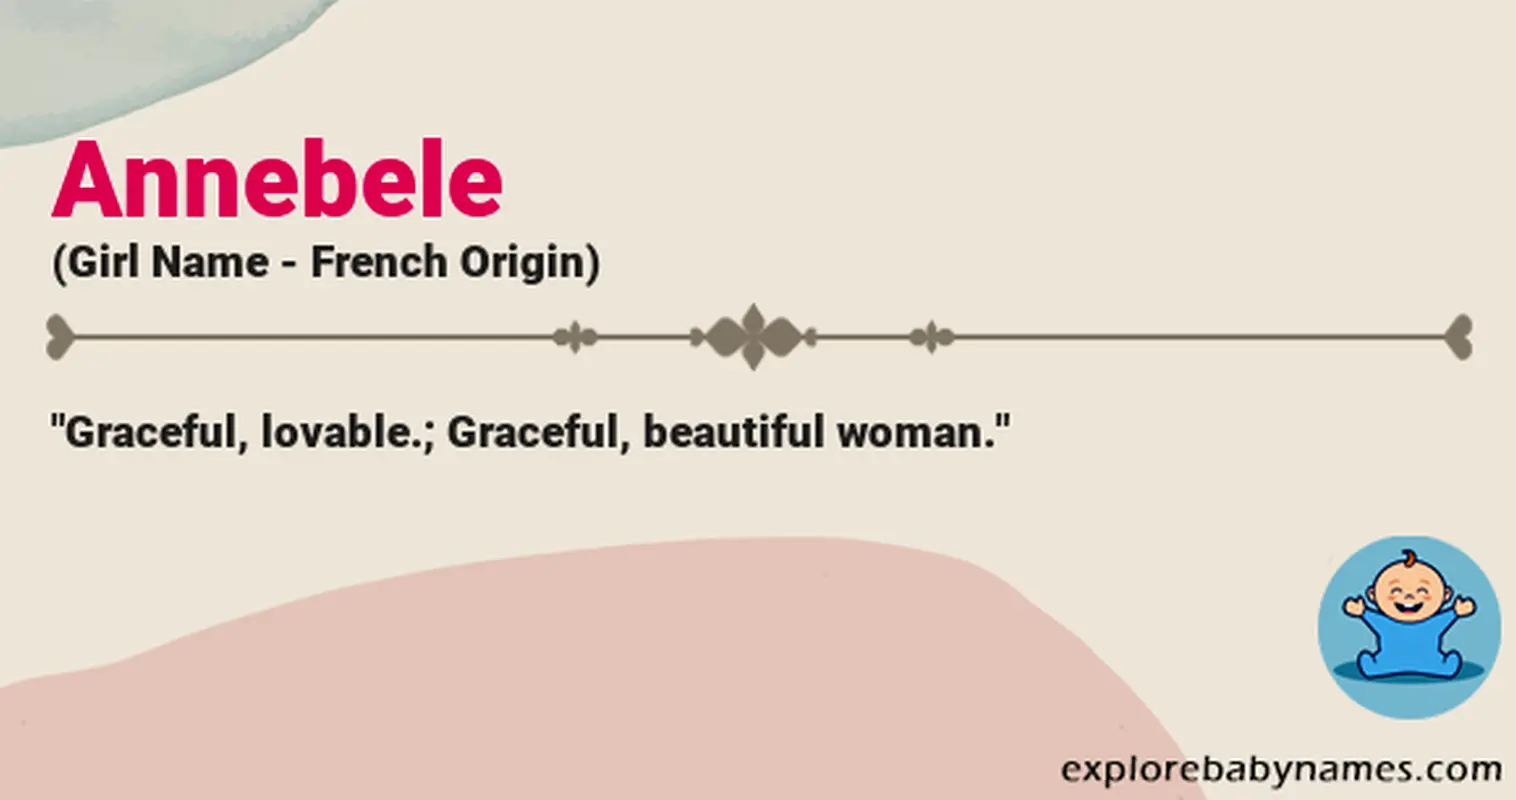 Meaning of Annebele